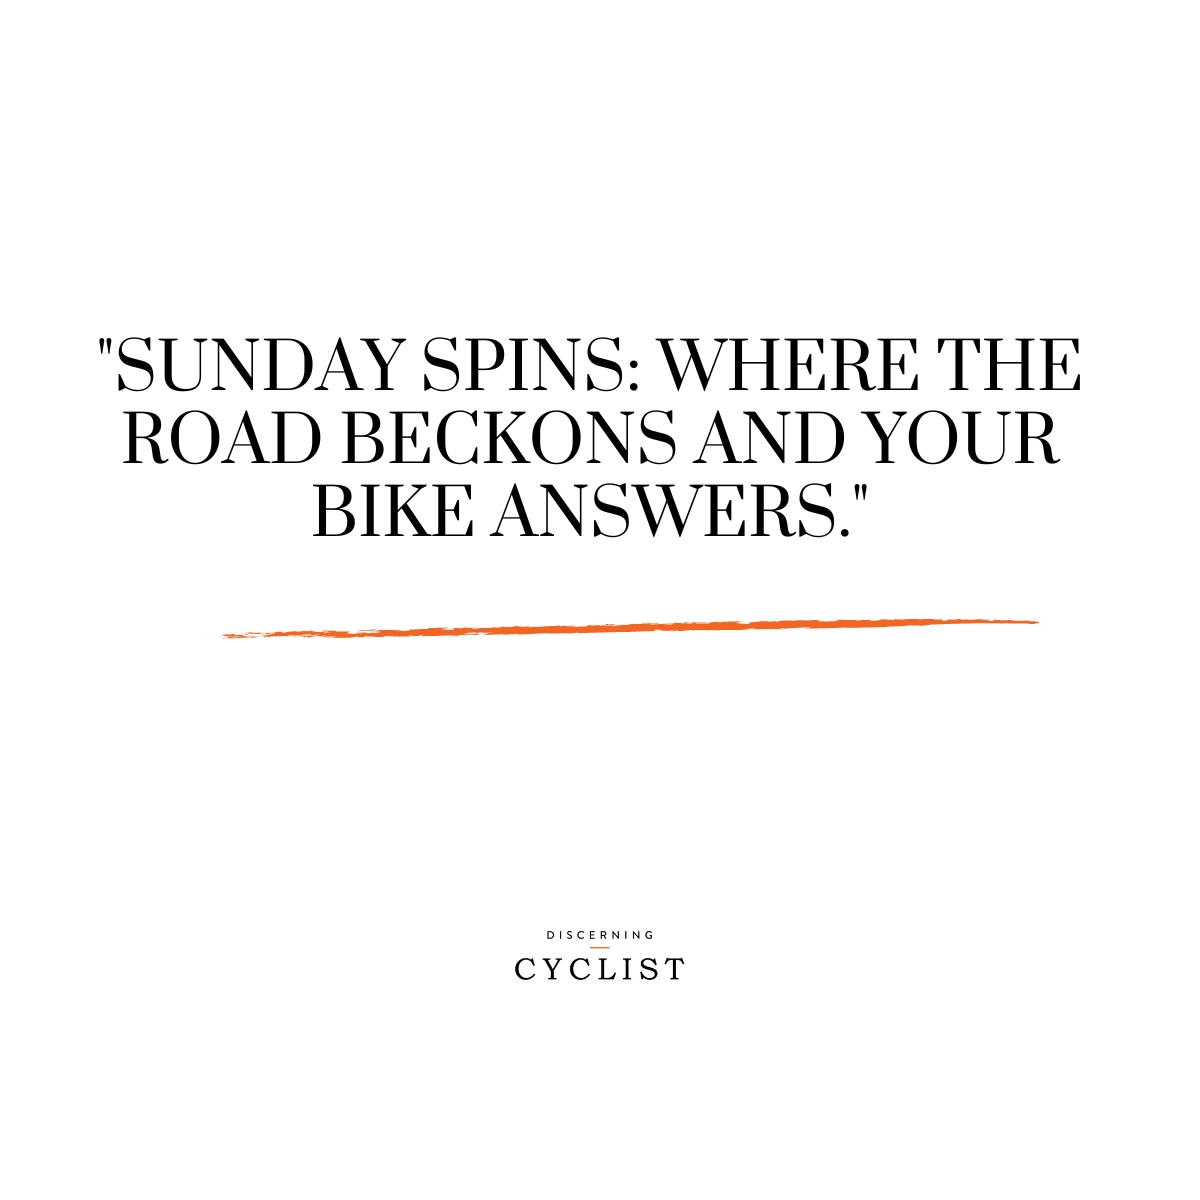 "Sunday spins: where the road beckons and your bike answers."